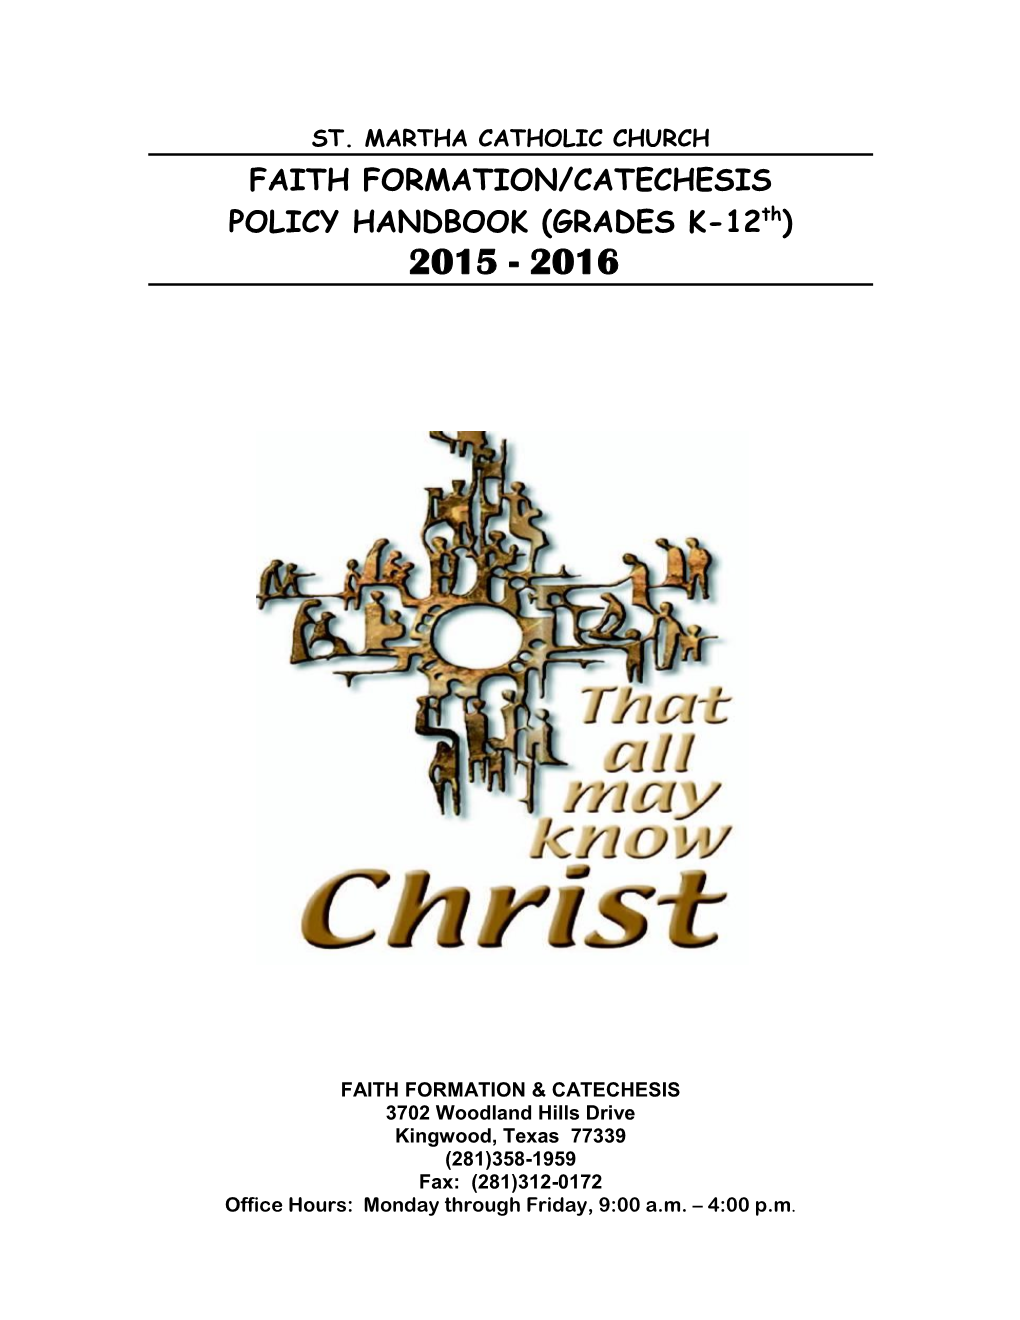 FAITH FORMATION/CATECHESIS POLICY HANDBOOK (GRADES K-12Th) 2015 - 2016